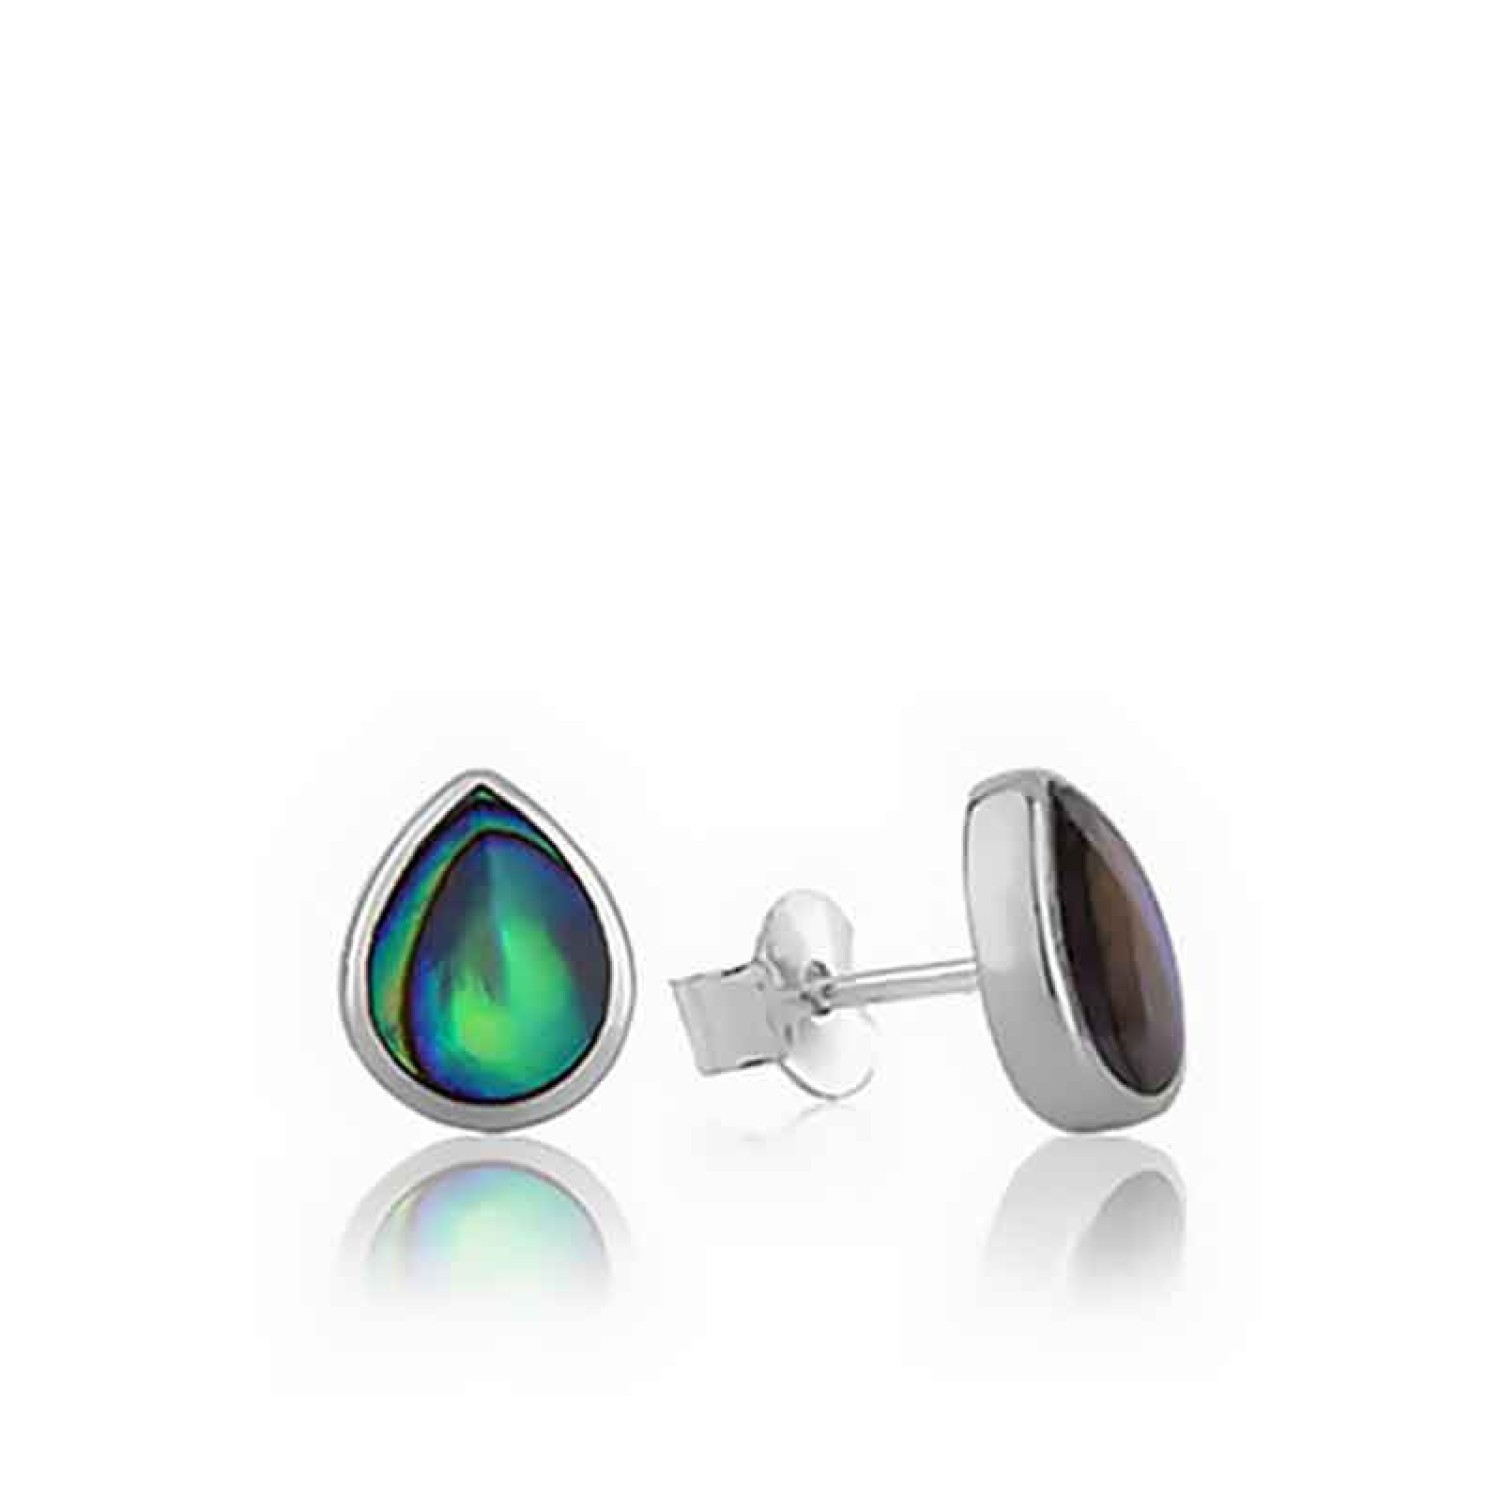 3E40006 Evolve Treasured Paua Silver Studs. The New Zealand pāua shell is the most exquisite and sought after in the world. Each treasured pāua piece is unique and special. Magical arrays of greens and purples burst from every shell. Māori believe pāua is